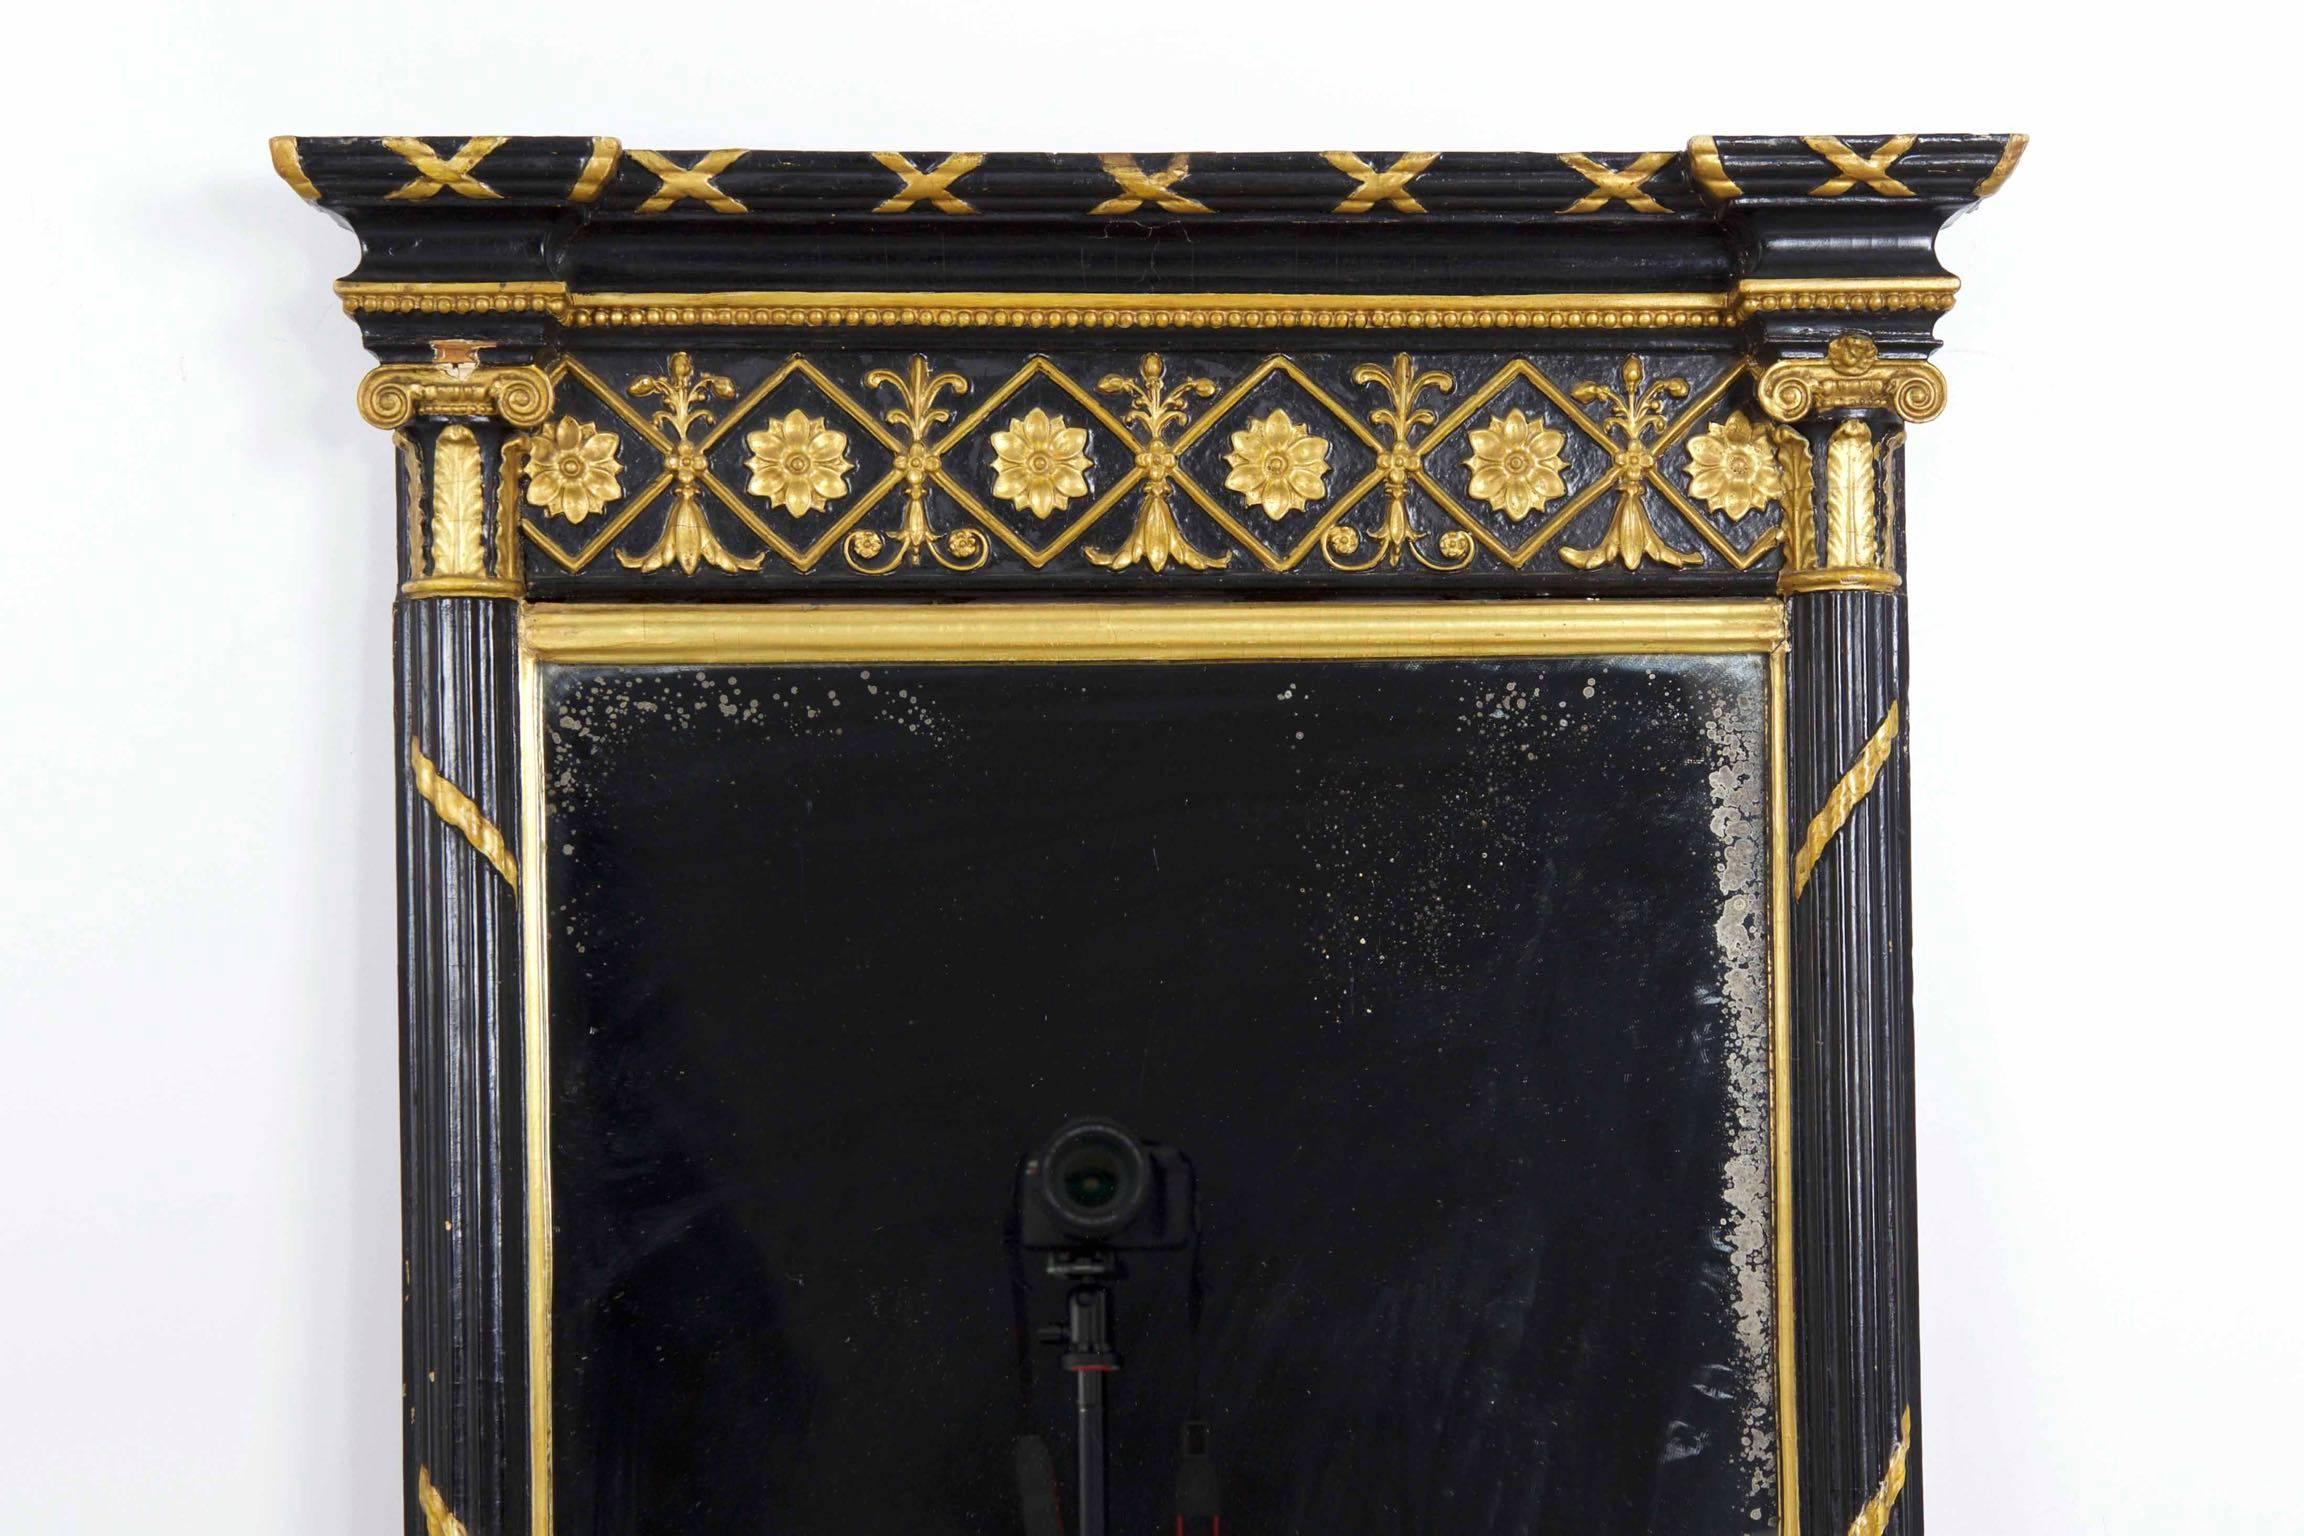 This elegant Regency period pier mirror is a practice in contrasts, utilizing a pure black pigment over gesso against the bright silvered glass and vibrant gilded highlights.  Borrowing from the French, the mirror incorporates a twisting and